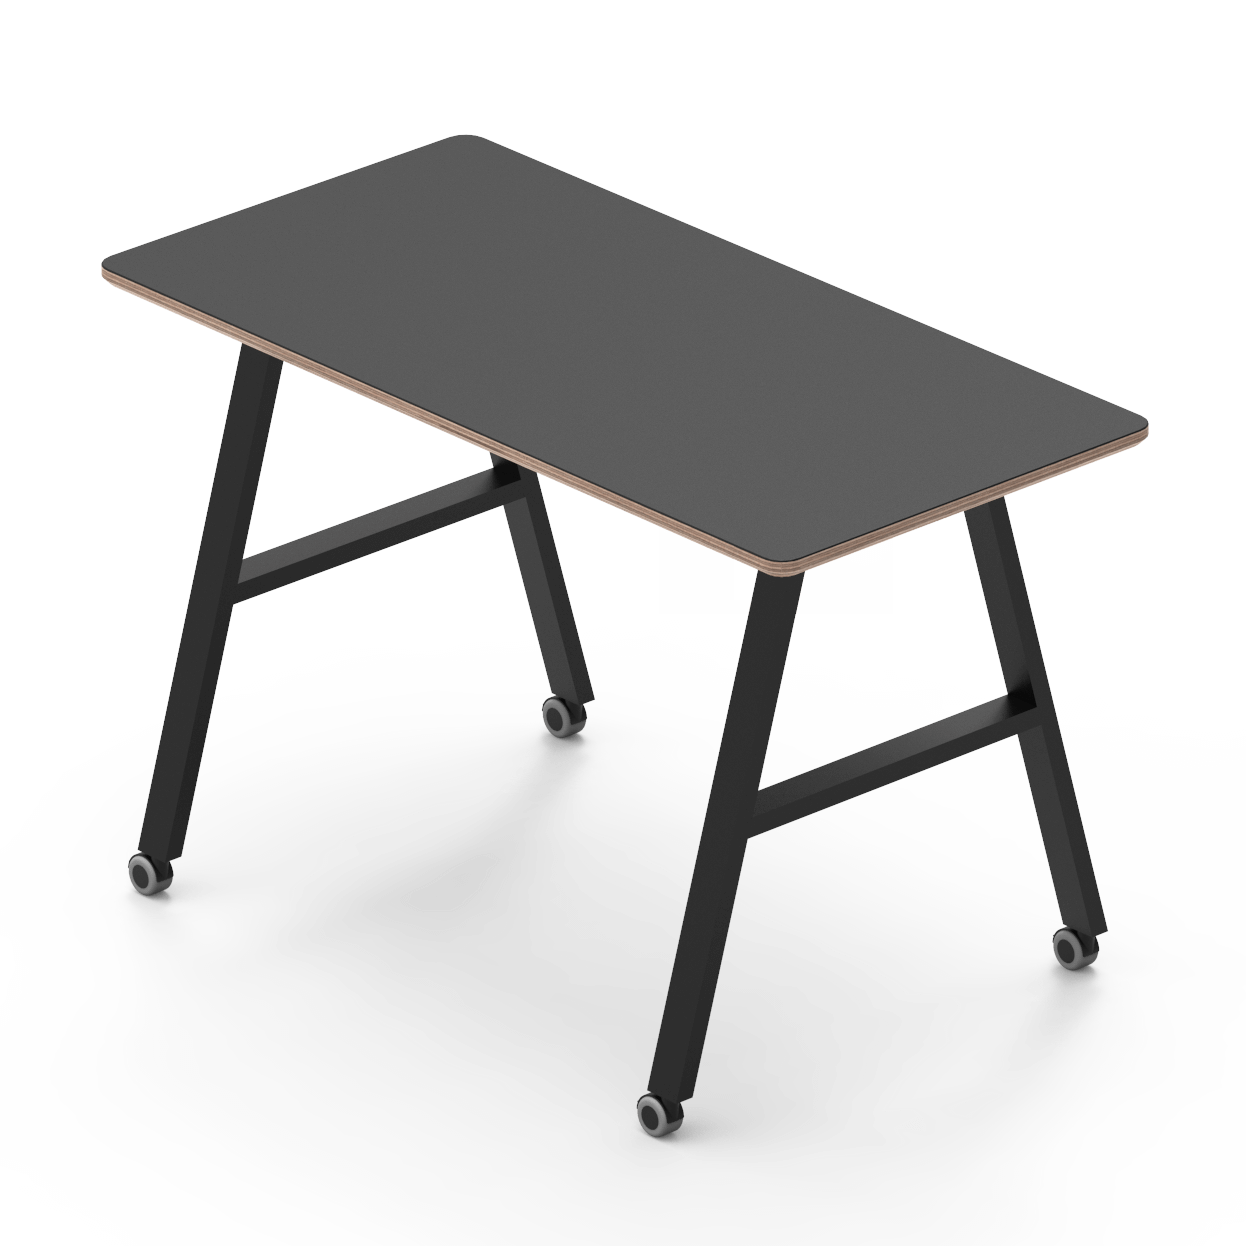 Workagile Anyway modular straight table in black